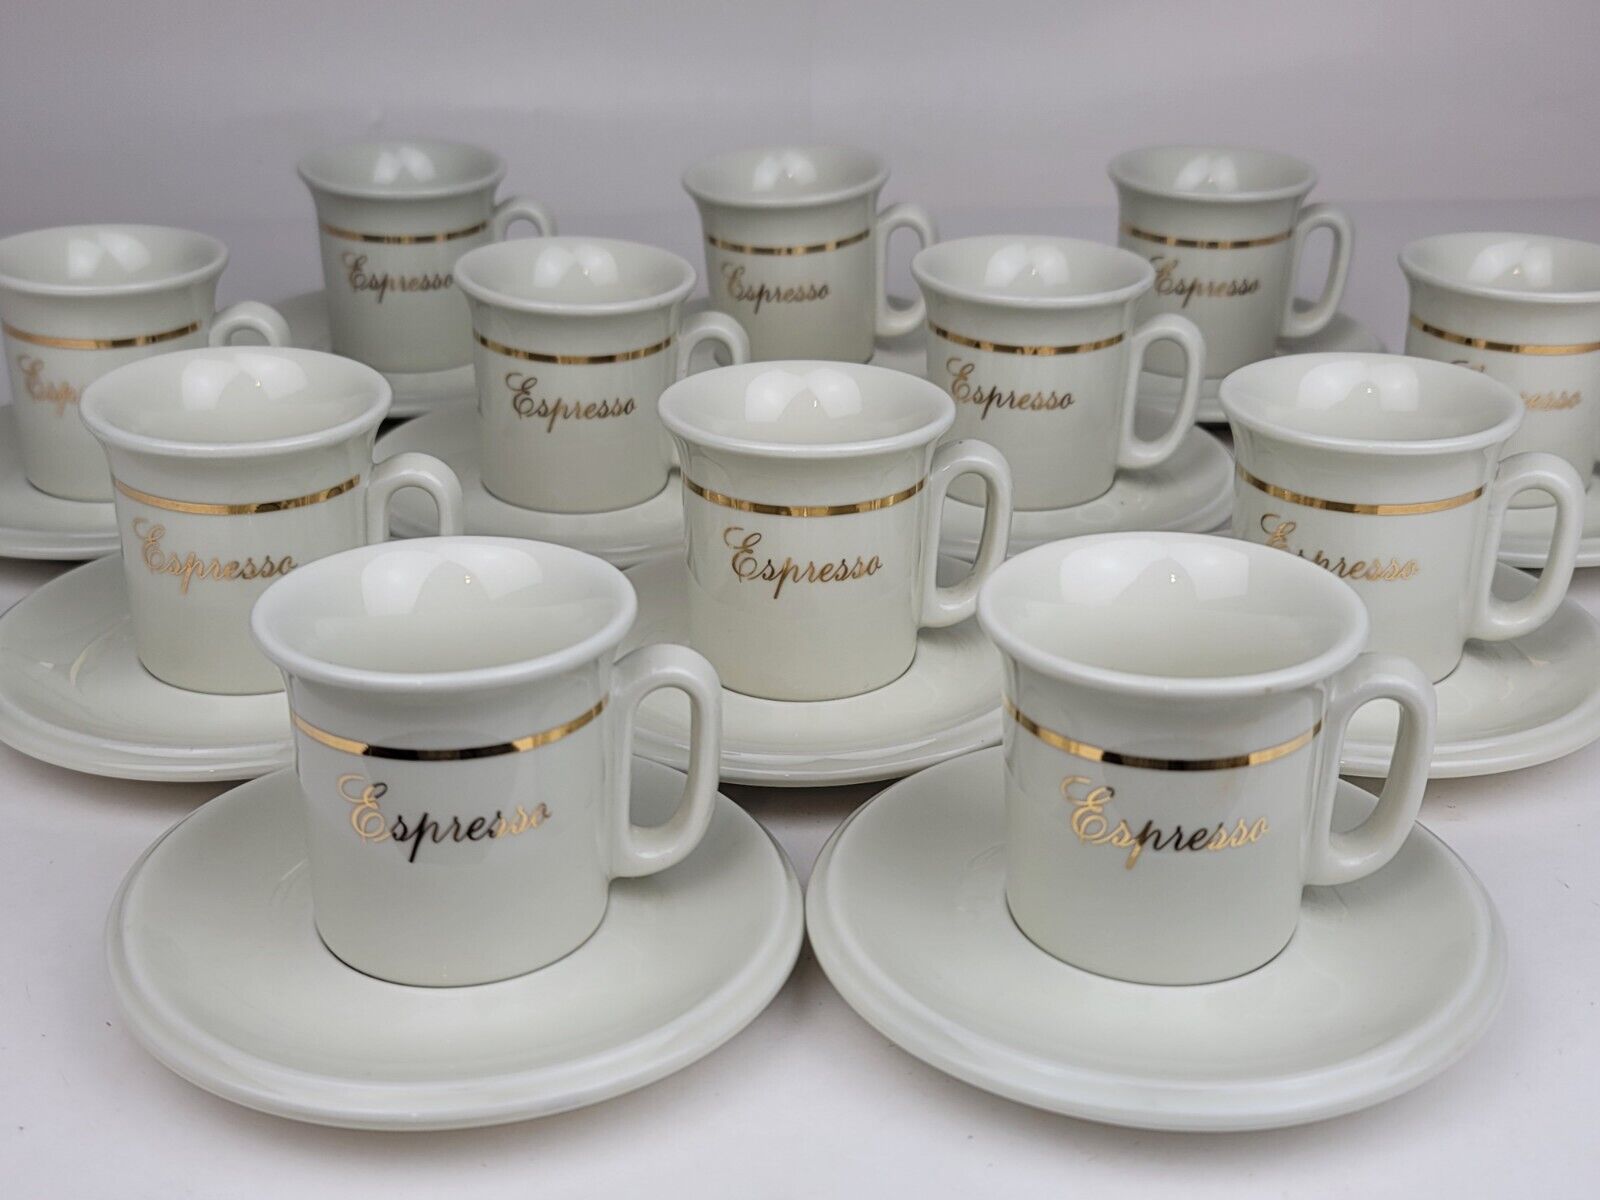 x12 Vintage ACF Made in Italy Espresso Cup & Saucer Lot White with Gold Design